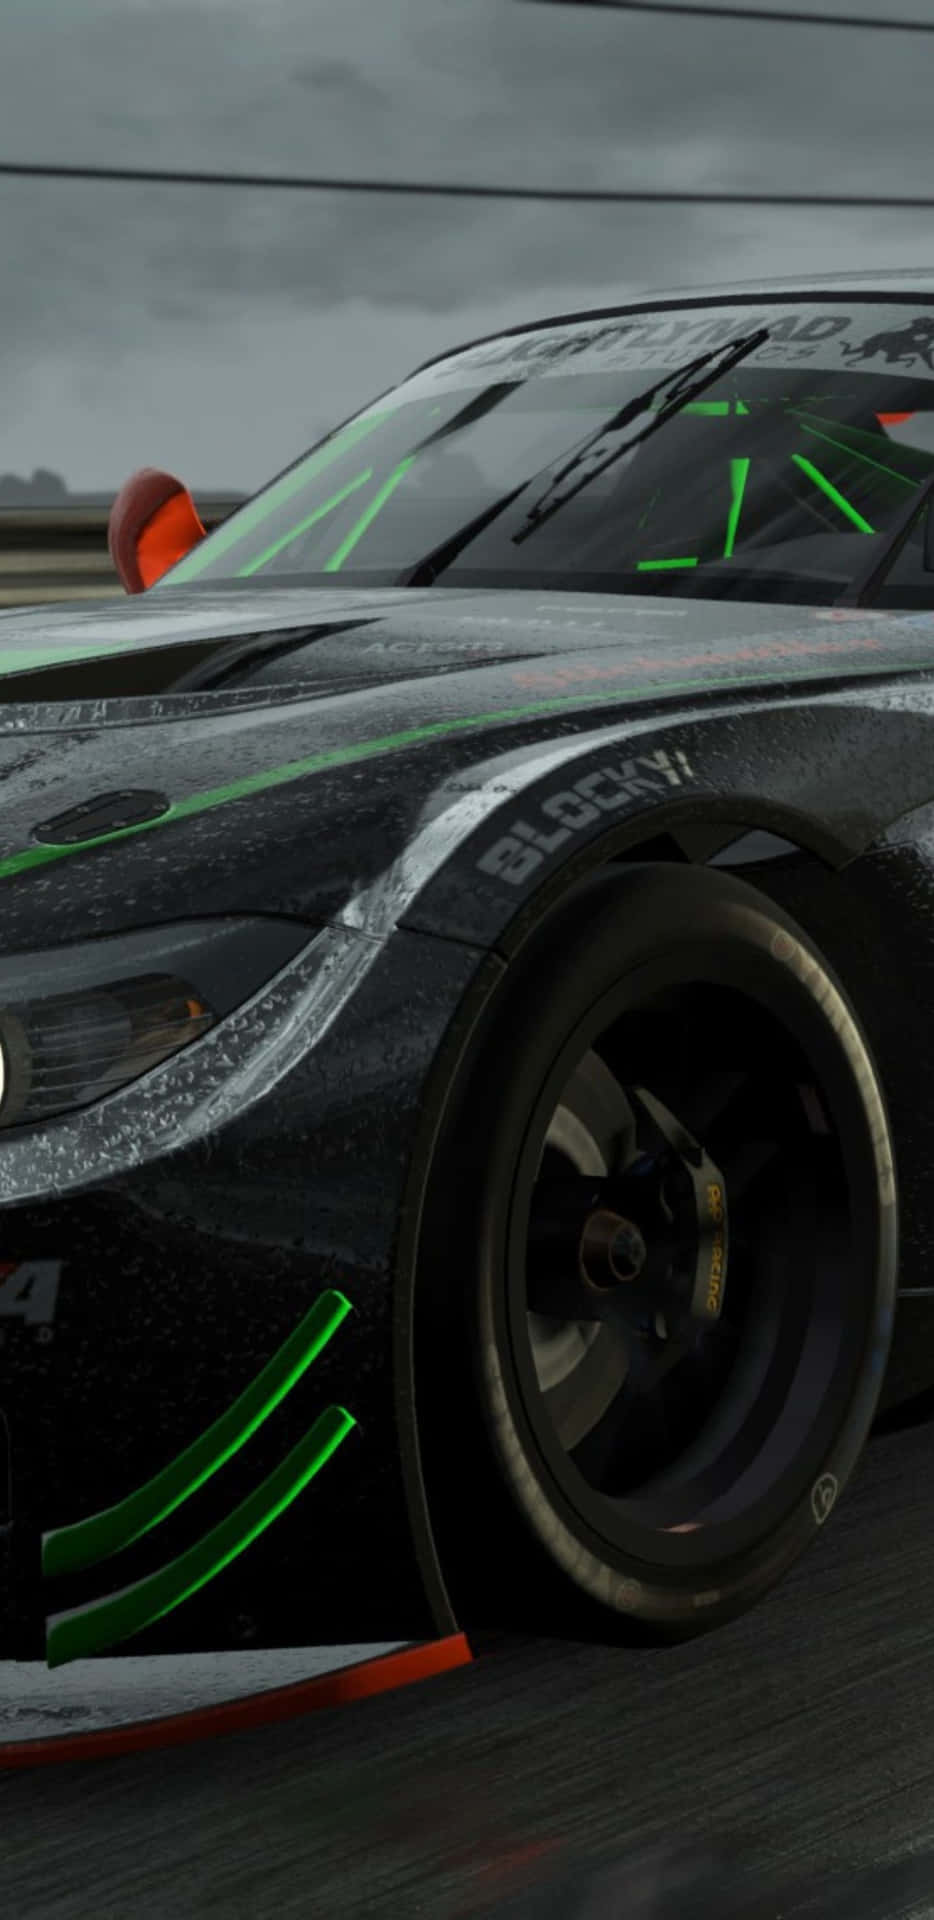 a black and green racing car in a rainy scene